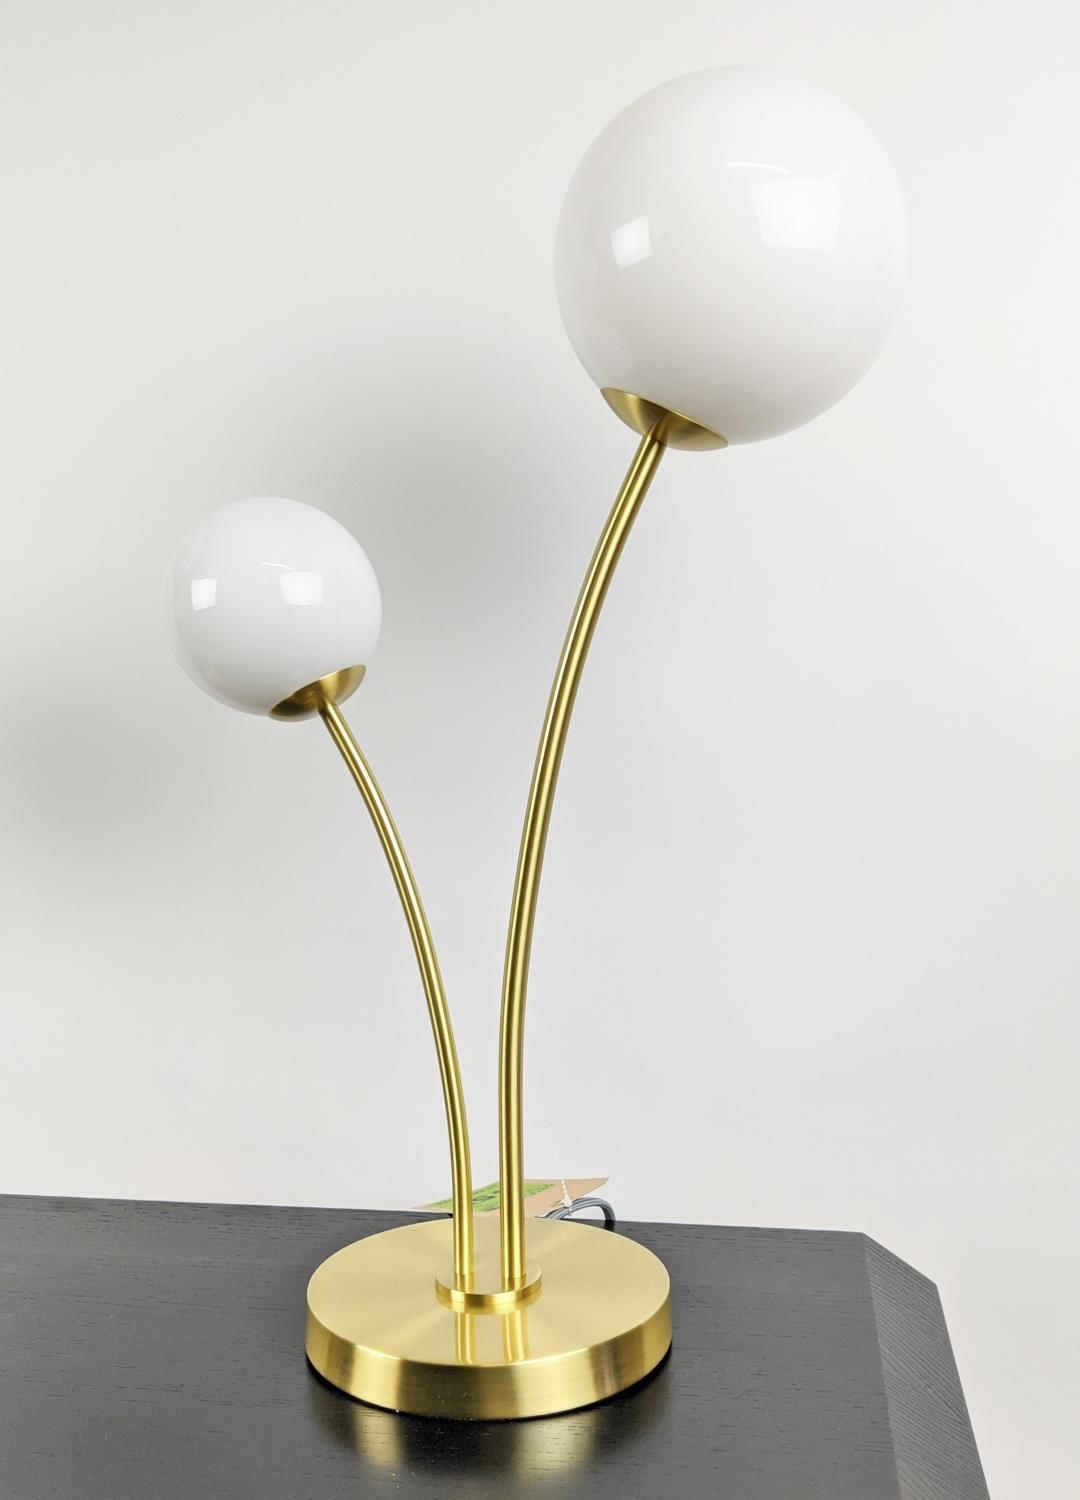 TABLE LAMPS, a pair, contemporary floral inspired design, 55cm H each approx. (2) - Image 3 of 5